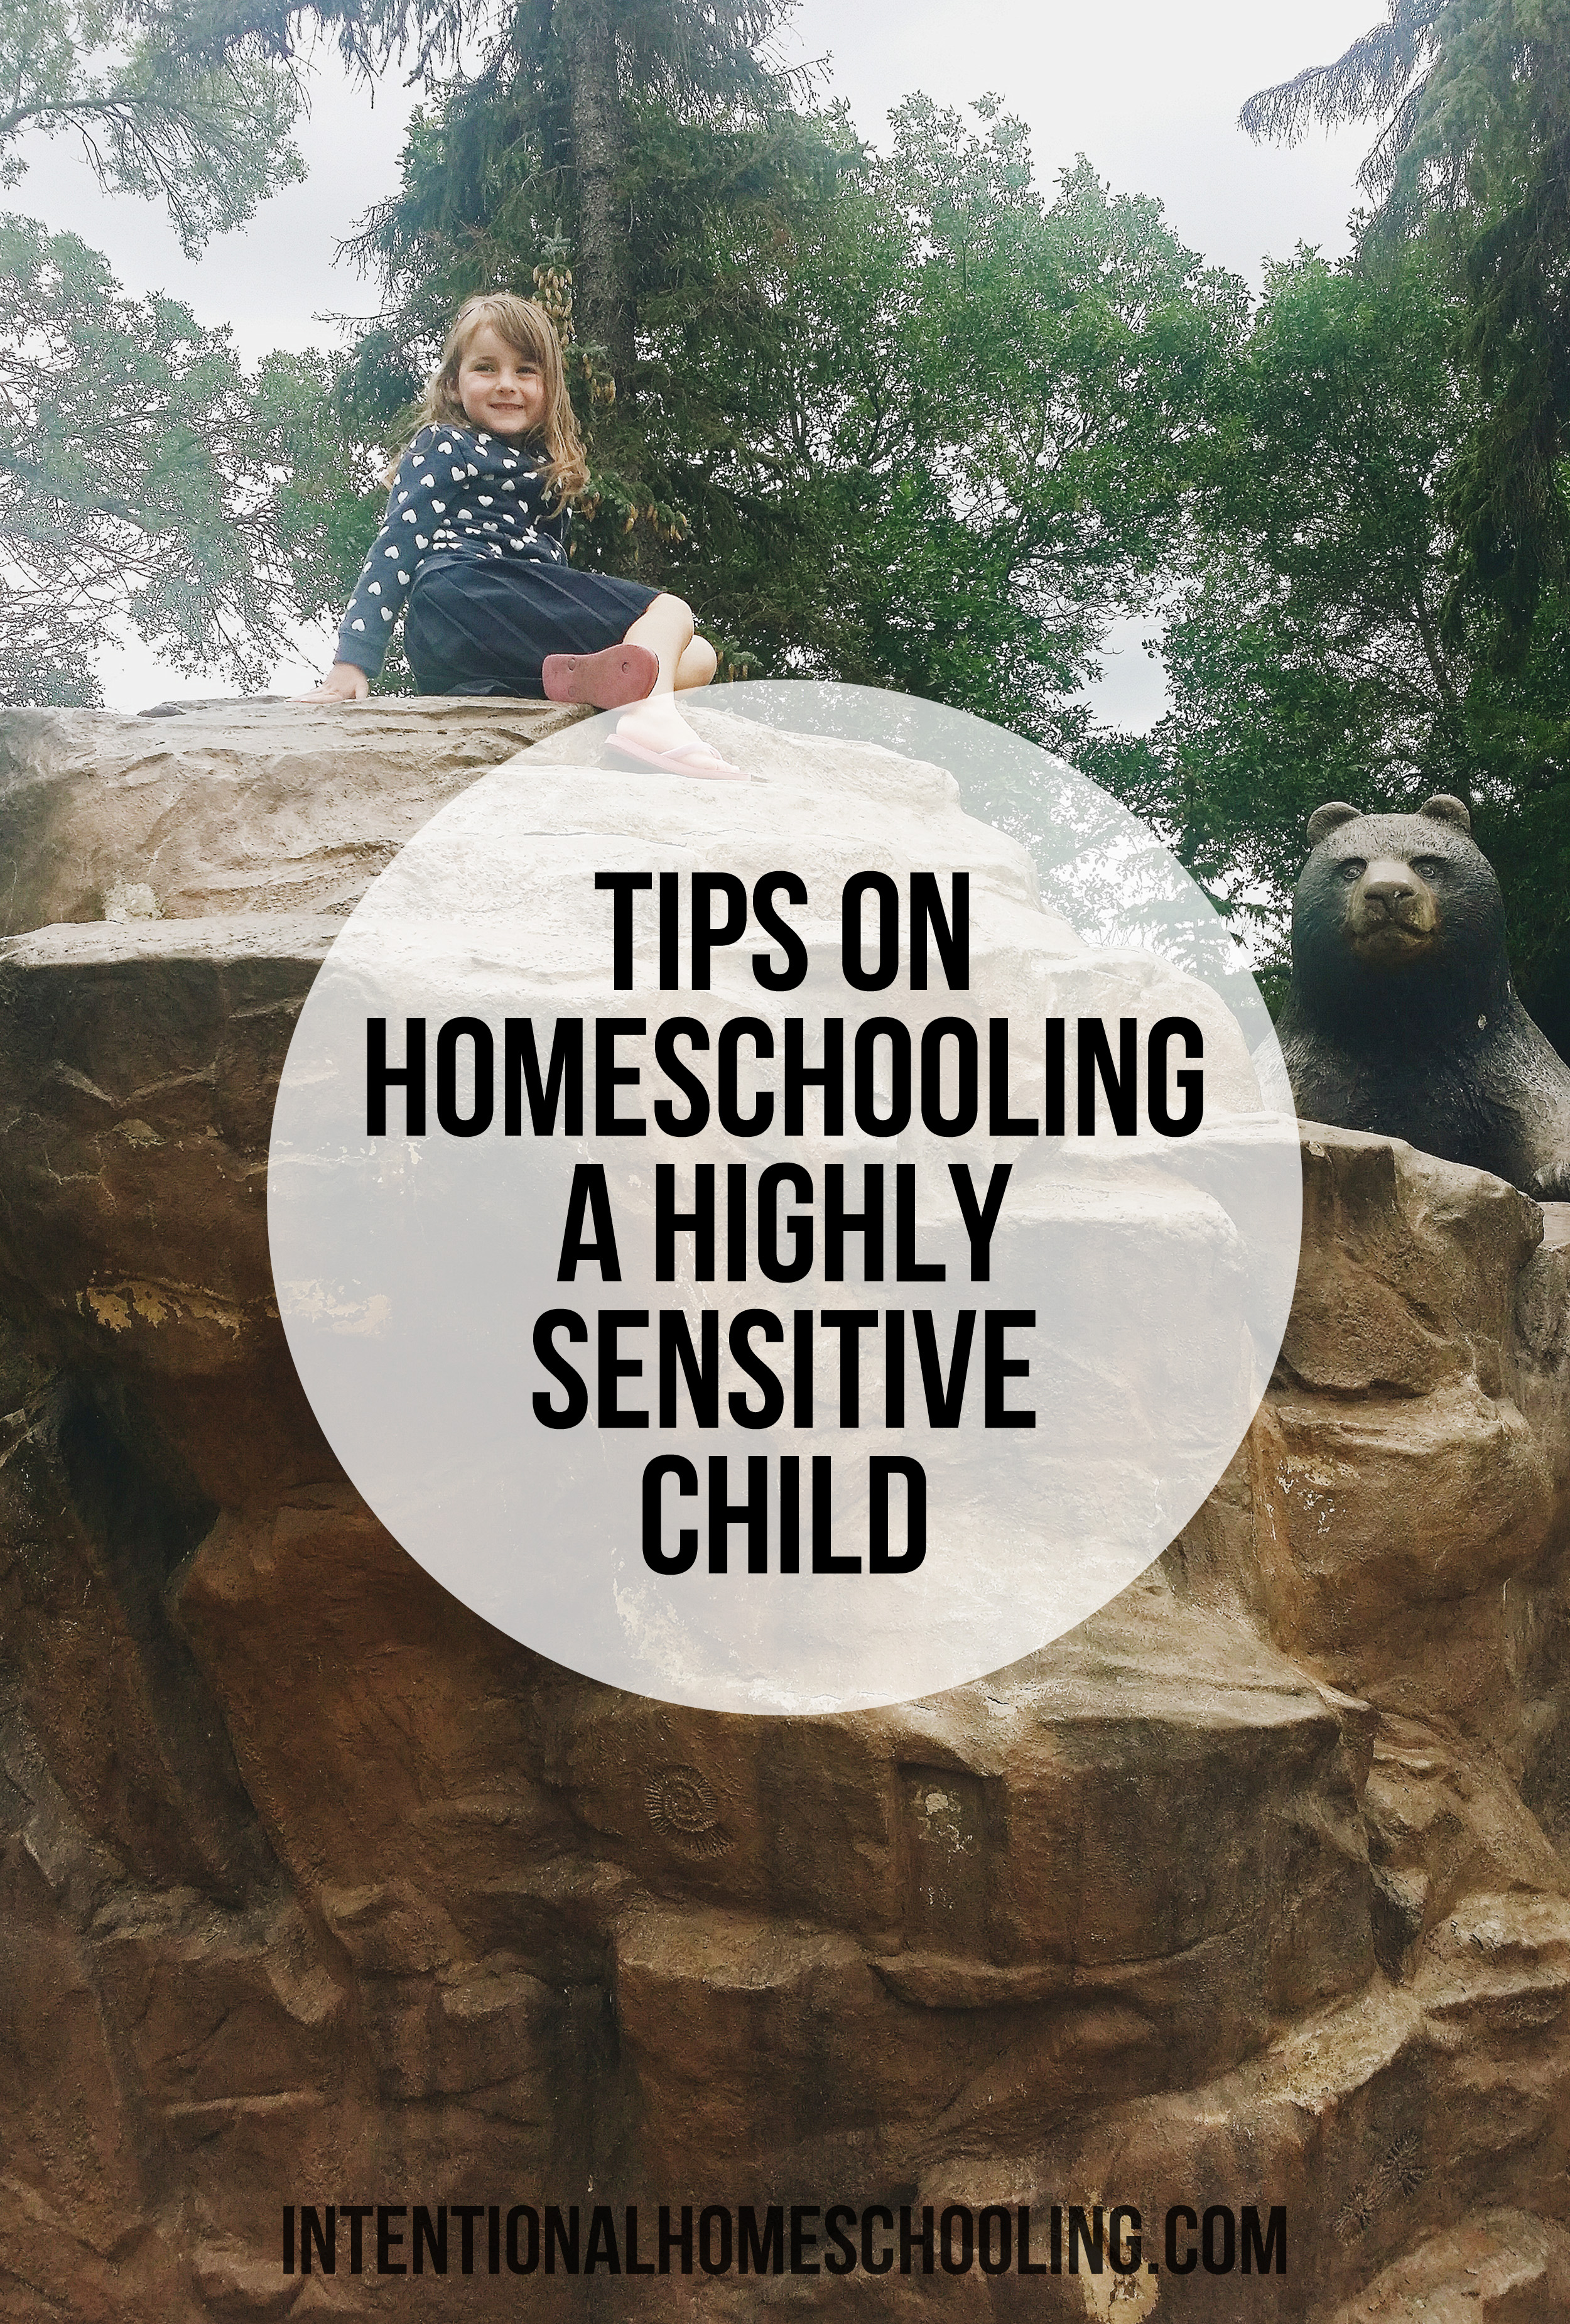 Tips on how to homeschool a highly sensitive child, little adjustments you can make in your homeschool to make the days easier for everyone.